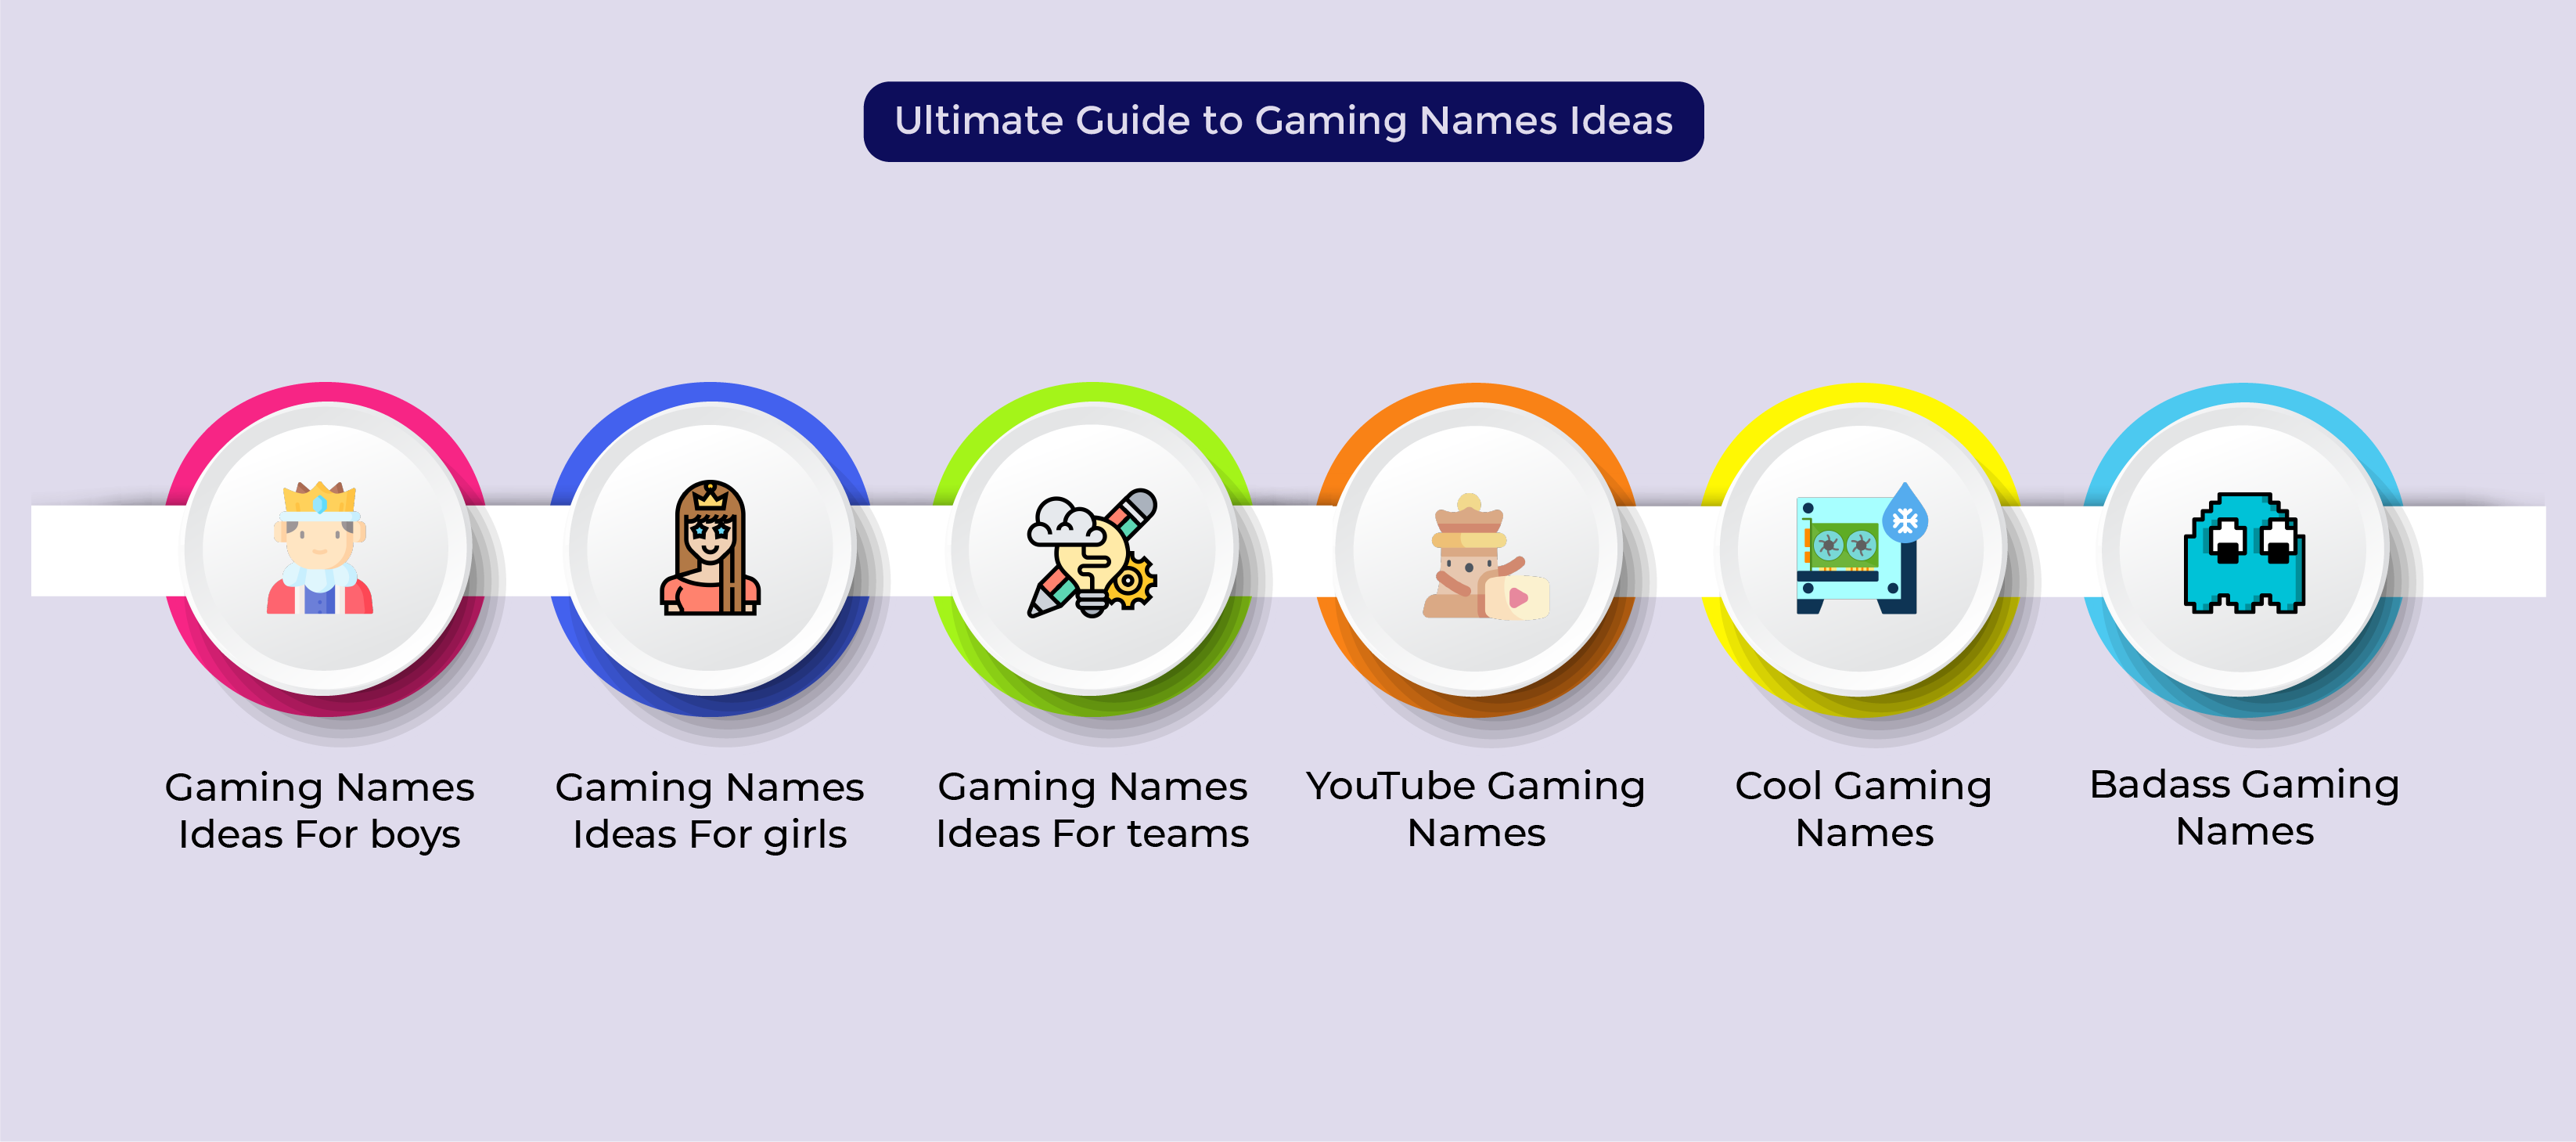 Ultimate Guide to Gaming Names Ideas